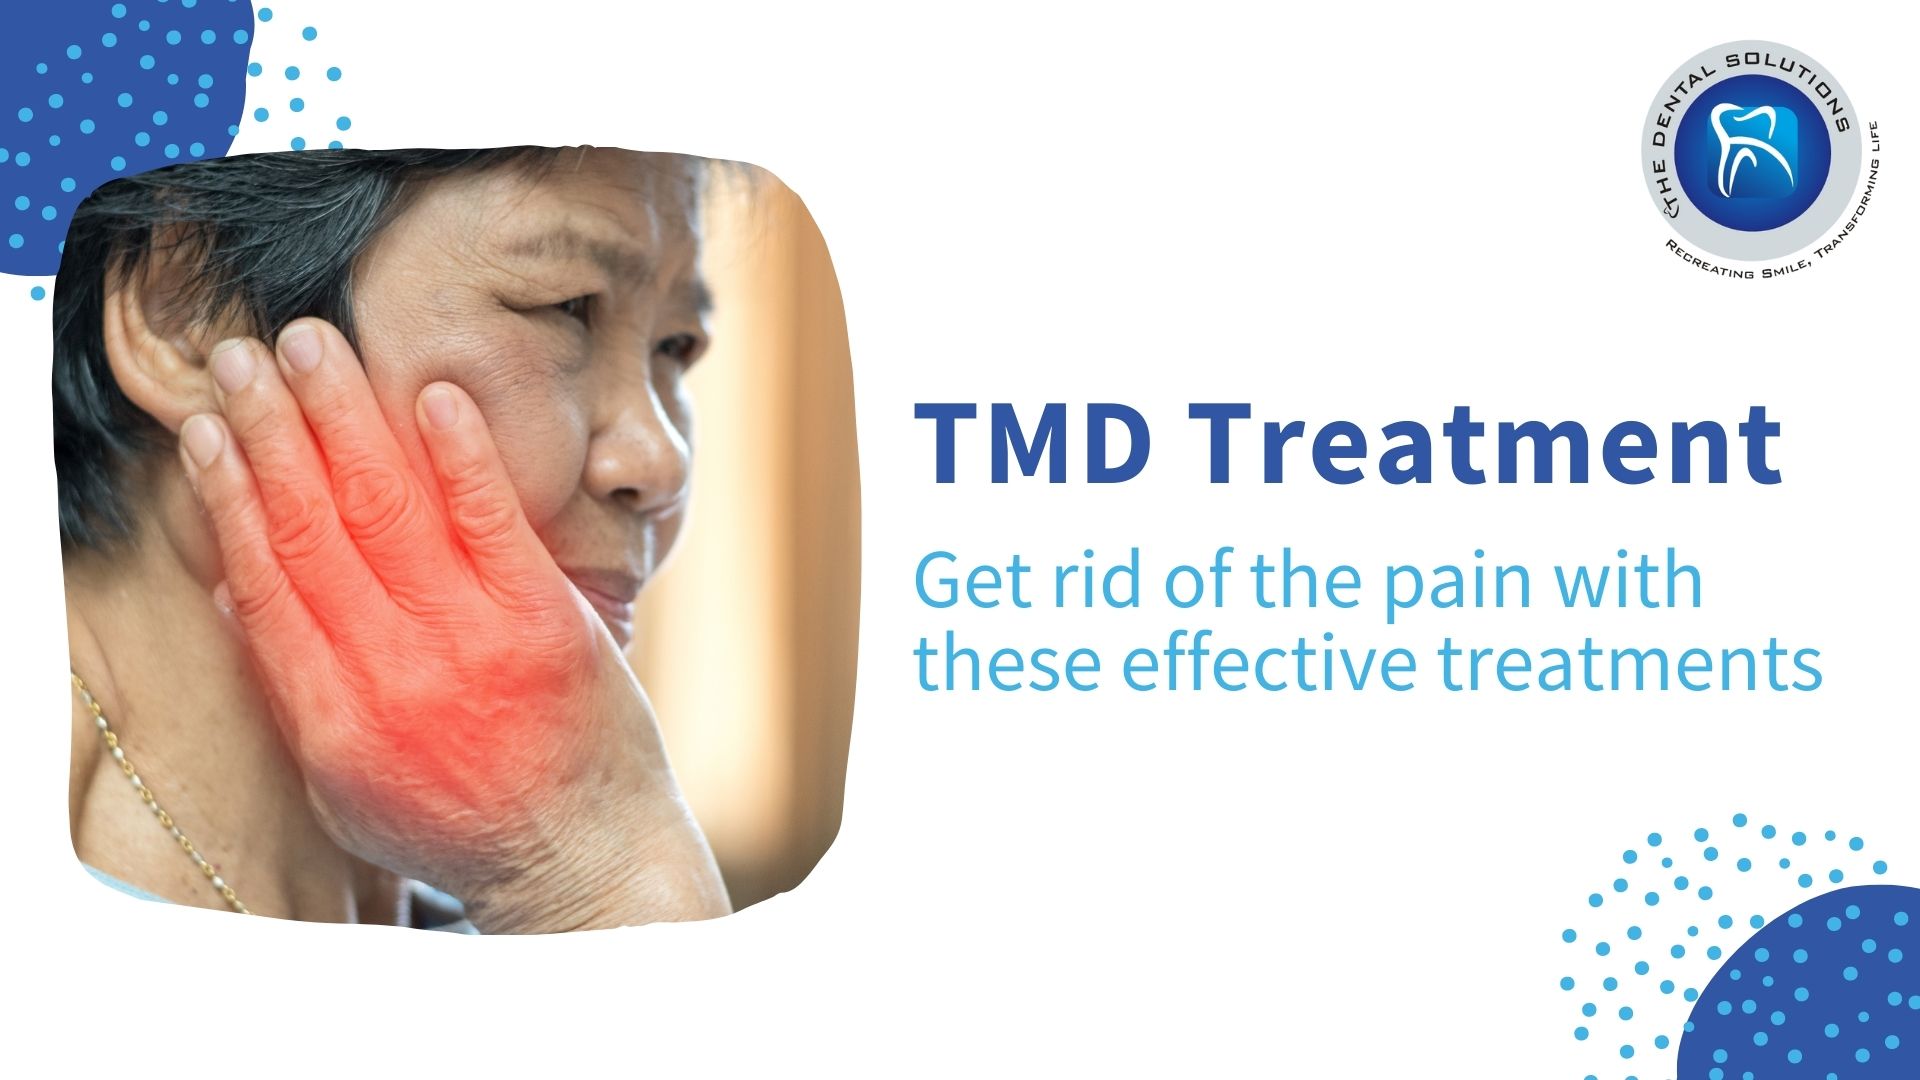 Get rid of the pain with these effective treatments: TMD Treatment Cost